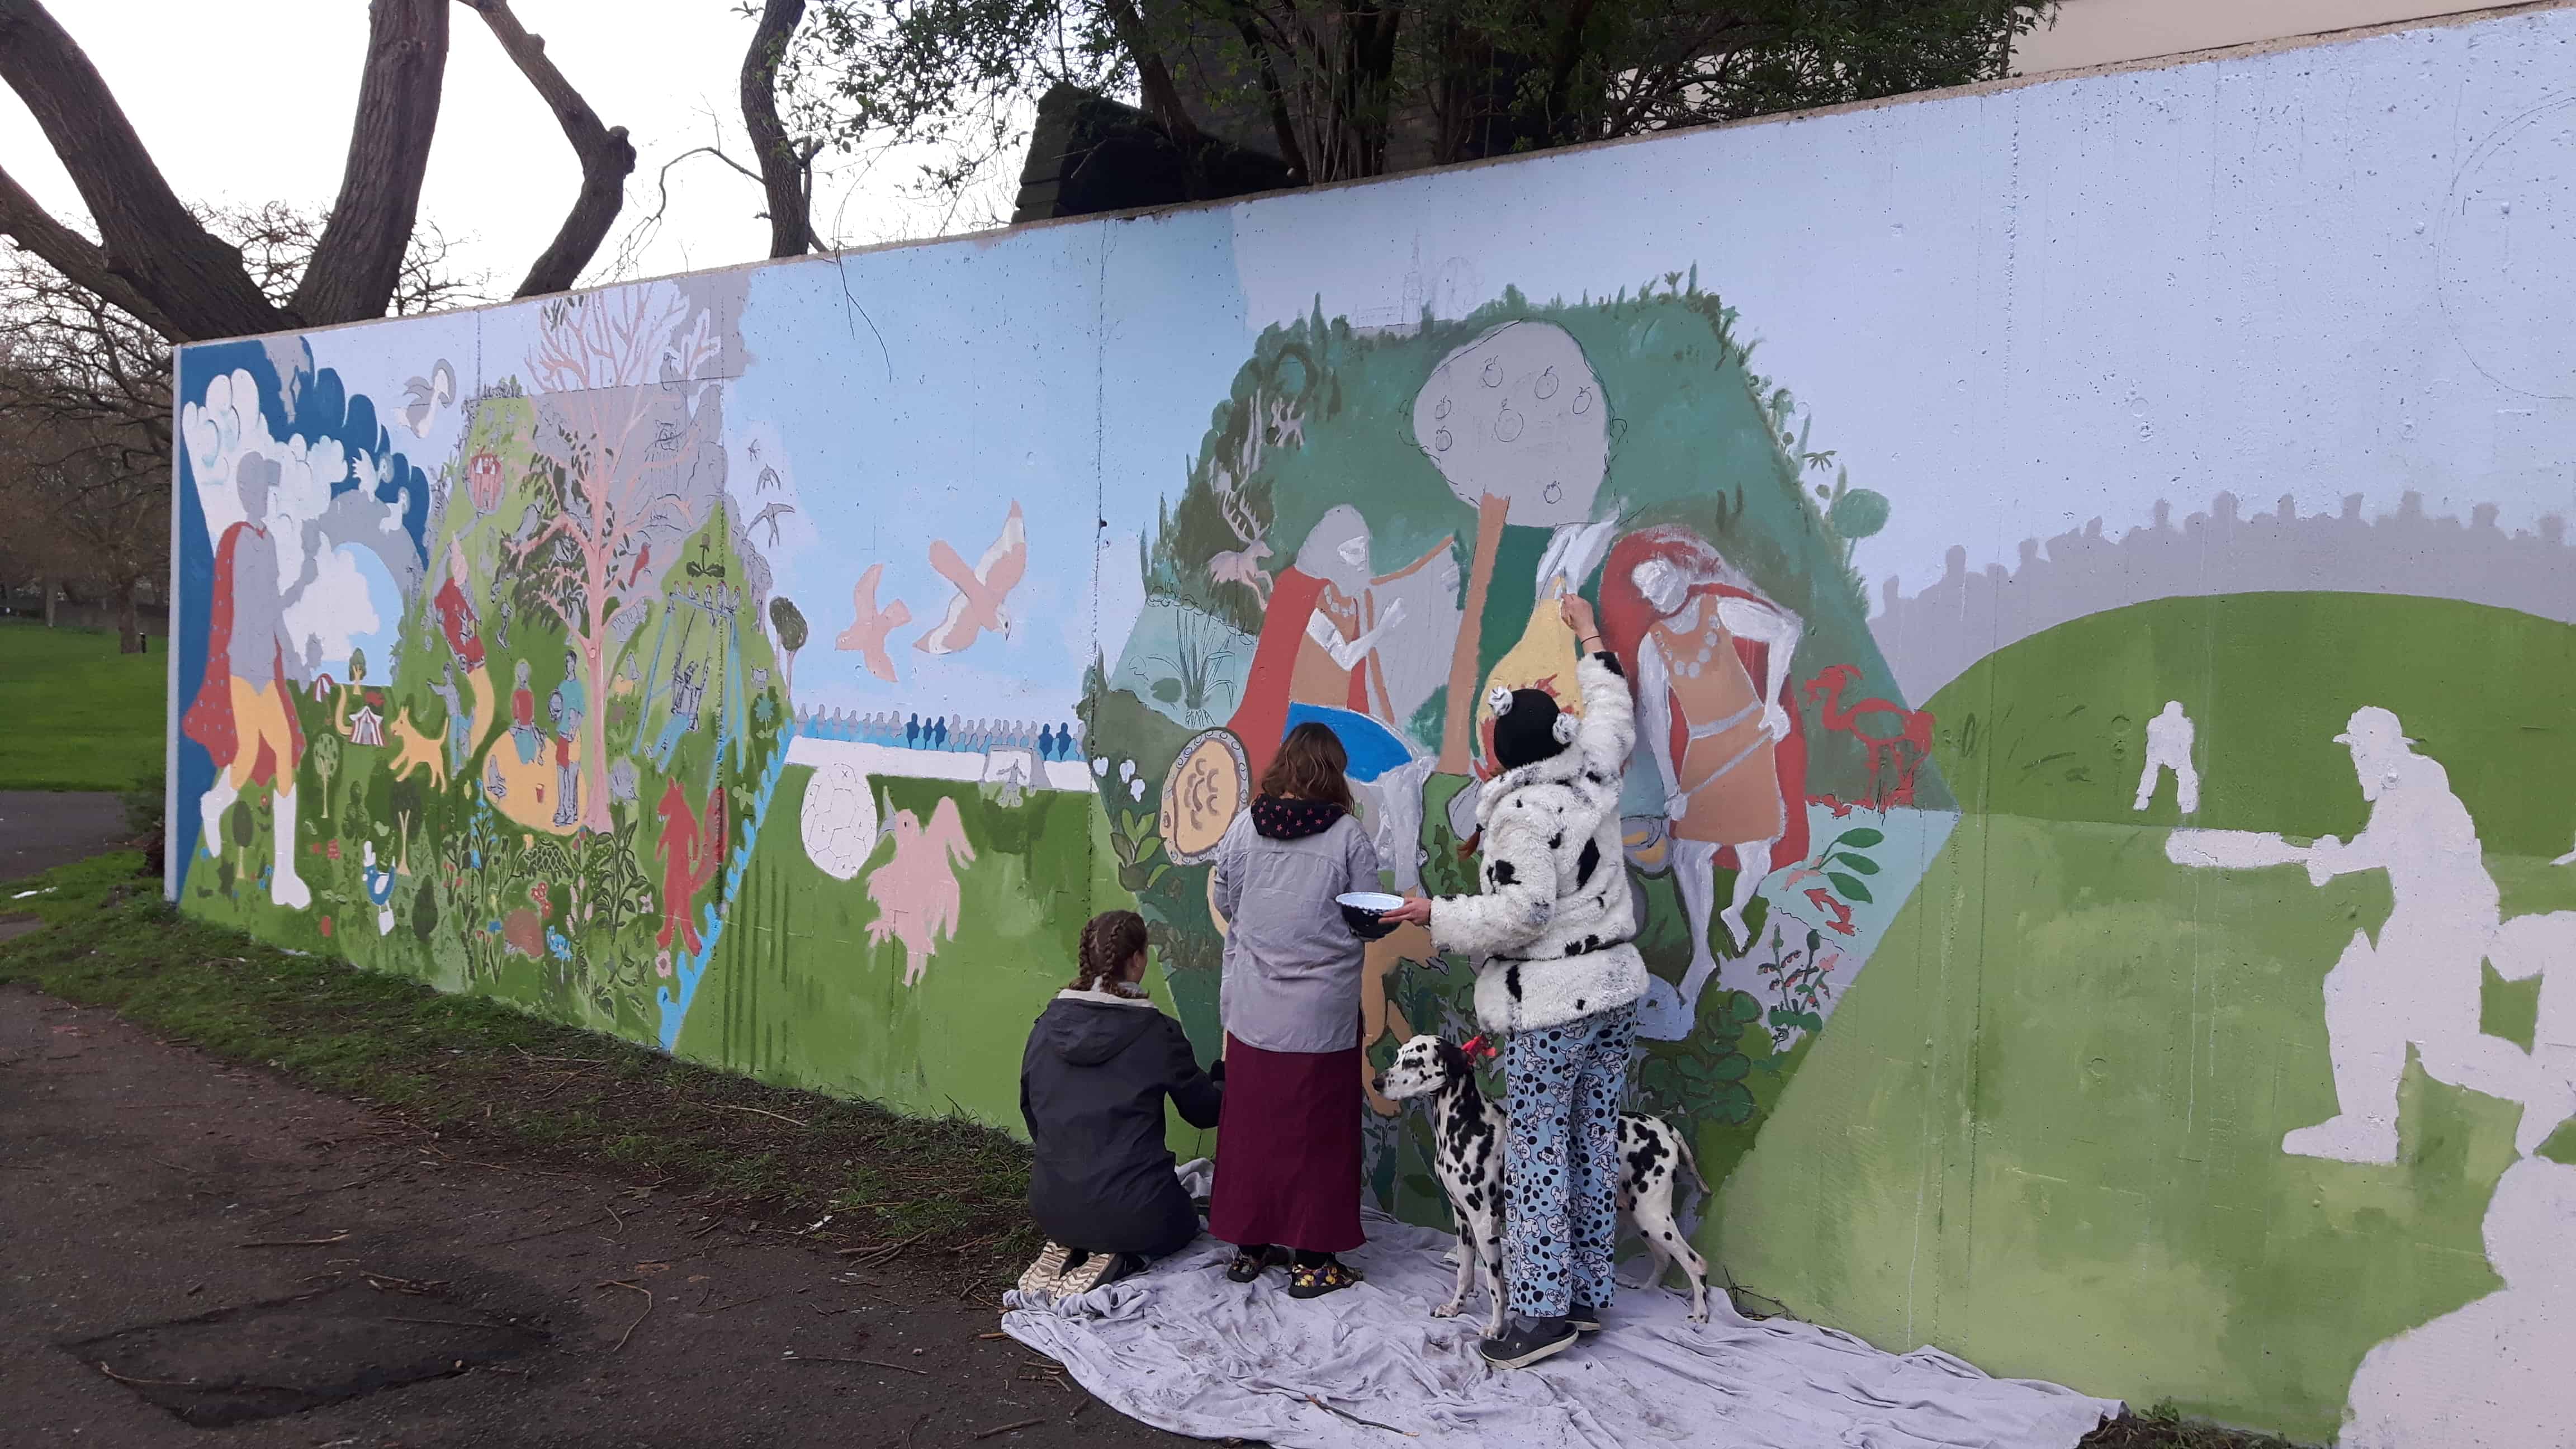 The first part of the mural nears completion in Kennington Park this week.